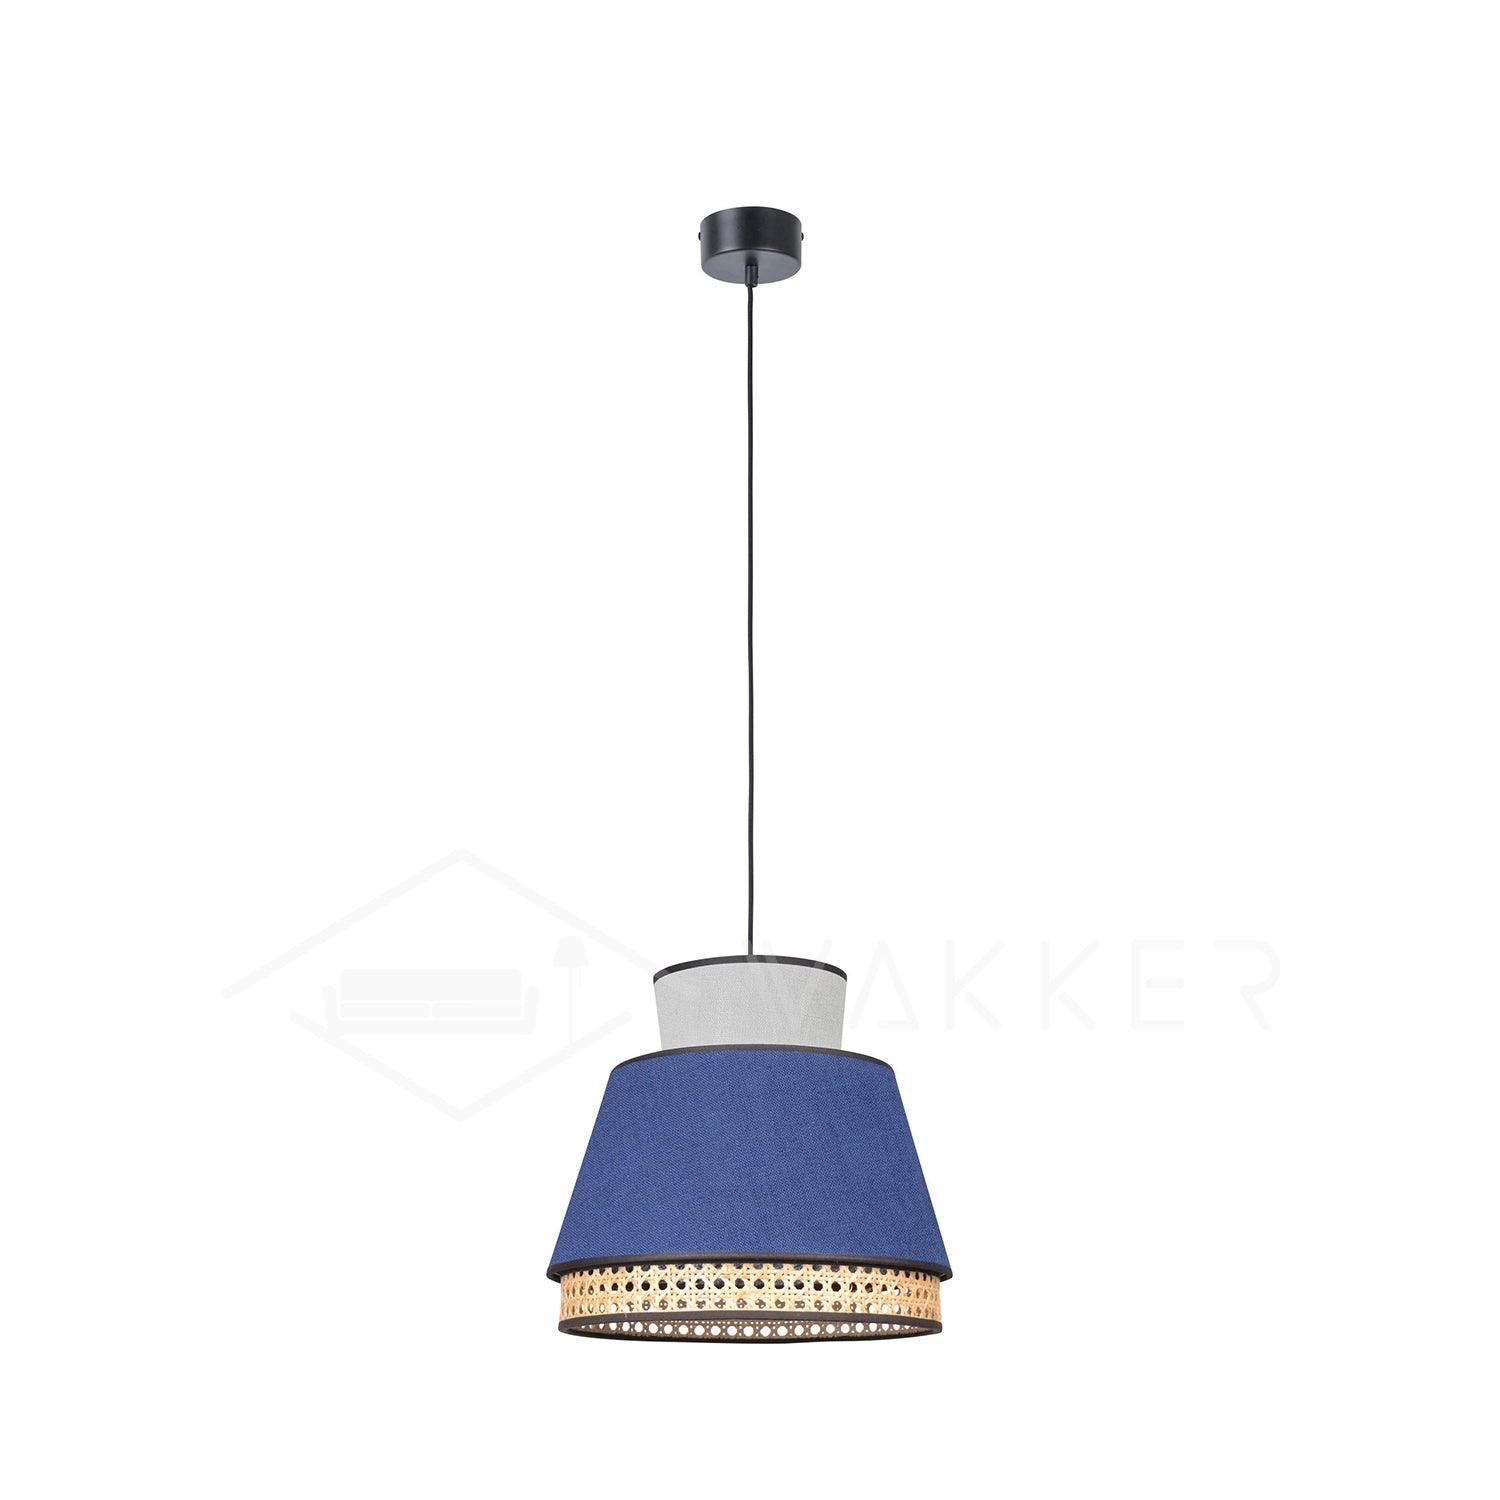 Grey and Indigo Singapour MM Suspended Lights, measuring 19.7" in diameter and 17.7" in height (or 50cm x 45cm)